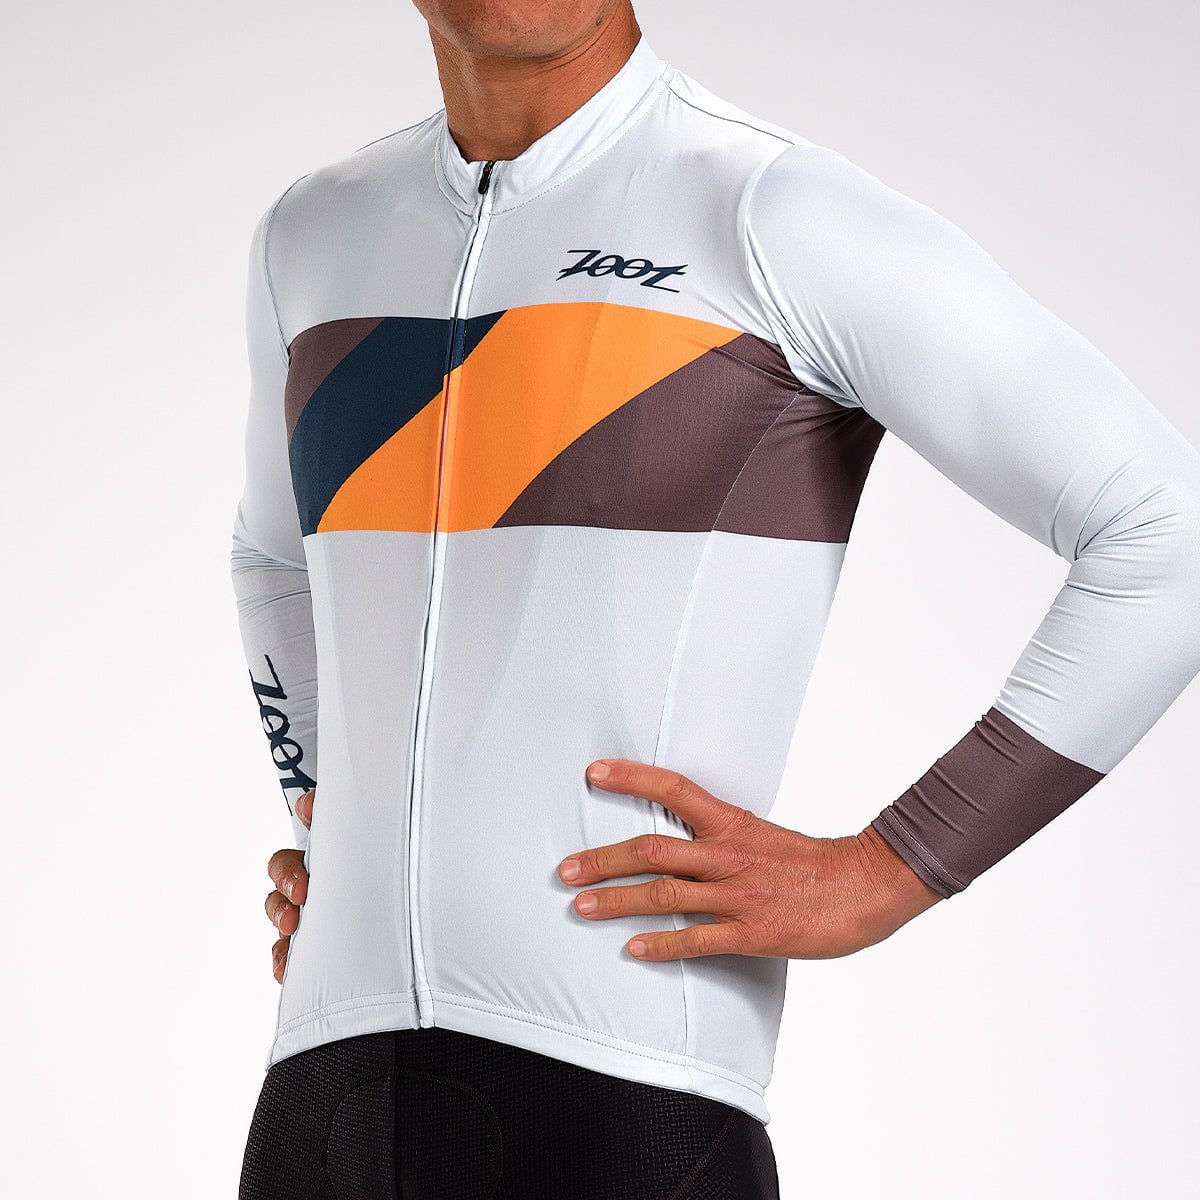 Zoot Sports CYCLE TOPS MENS LTD CYCLE SUN STOP LS JERSEY - SKY